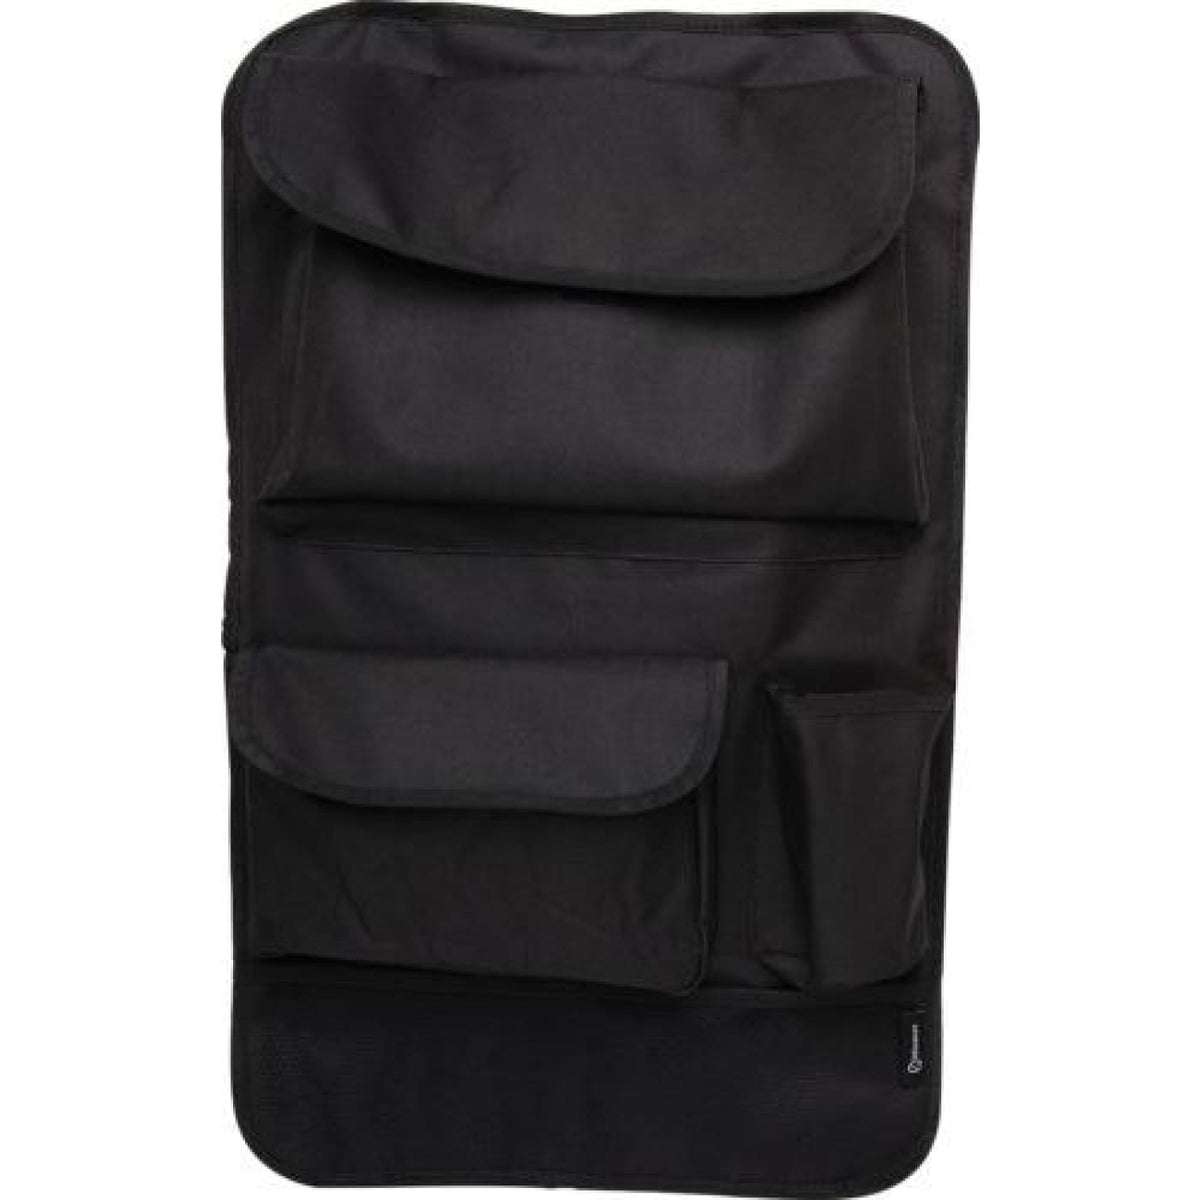 InfaSecure Deluxe Organiser - CAR SEATS - SEAT PROTECTORS/MIRRORS/STORAGE